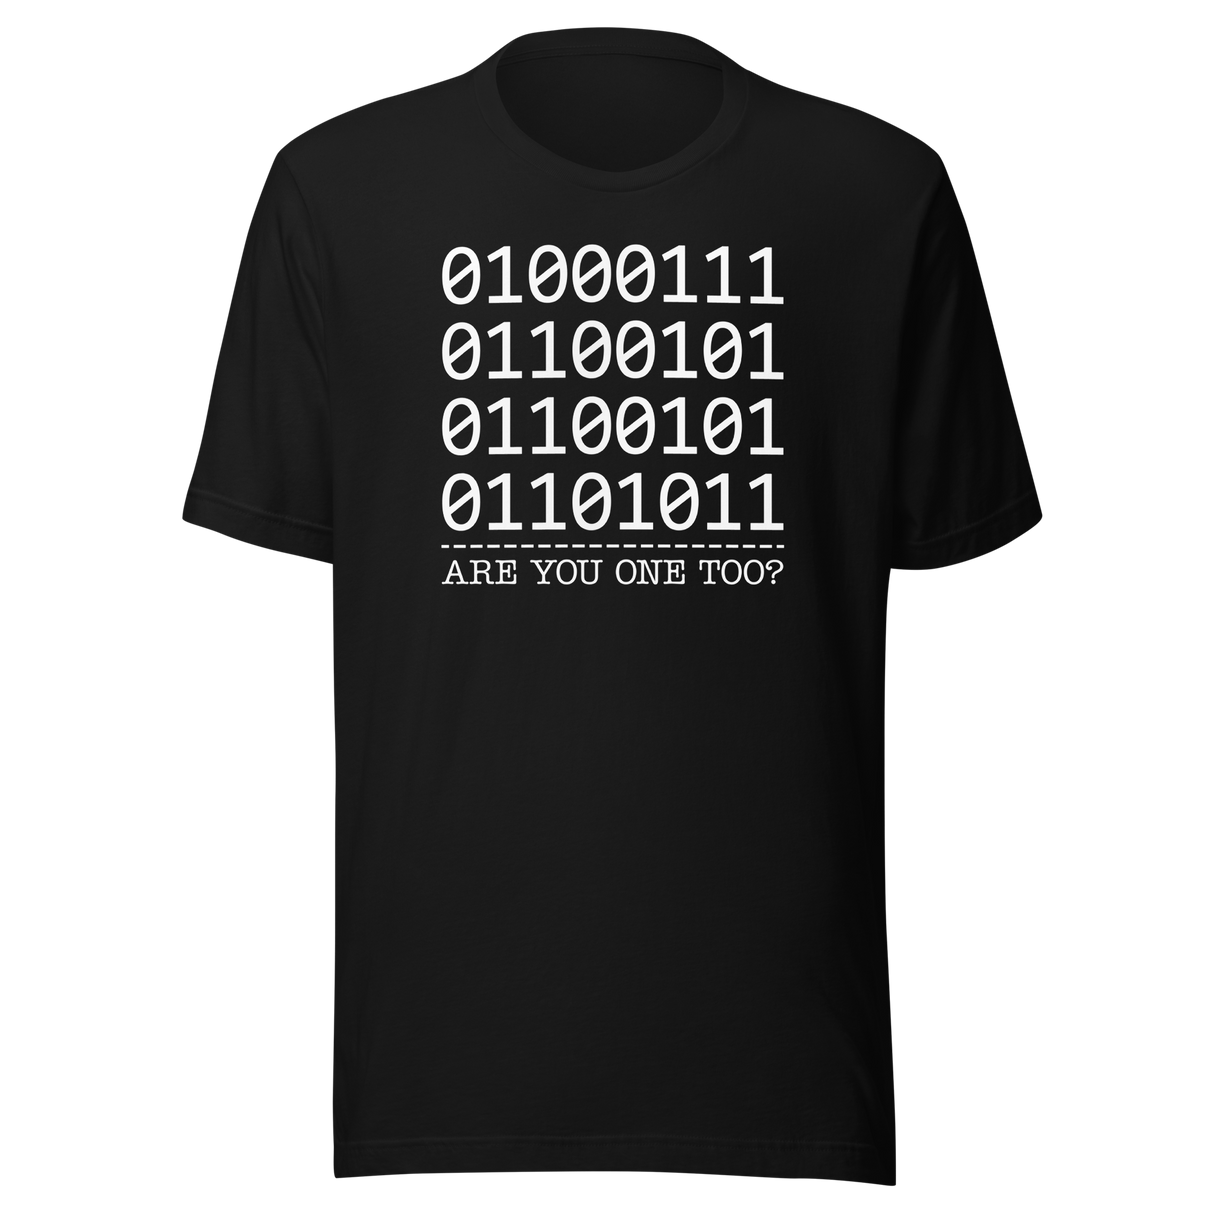 binary-code-computer-geek-are-you-one-too-tech-tee-binary-t-shirt-code-tee-computer-t-shirt-geek-tee#color_black